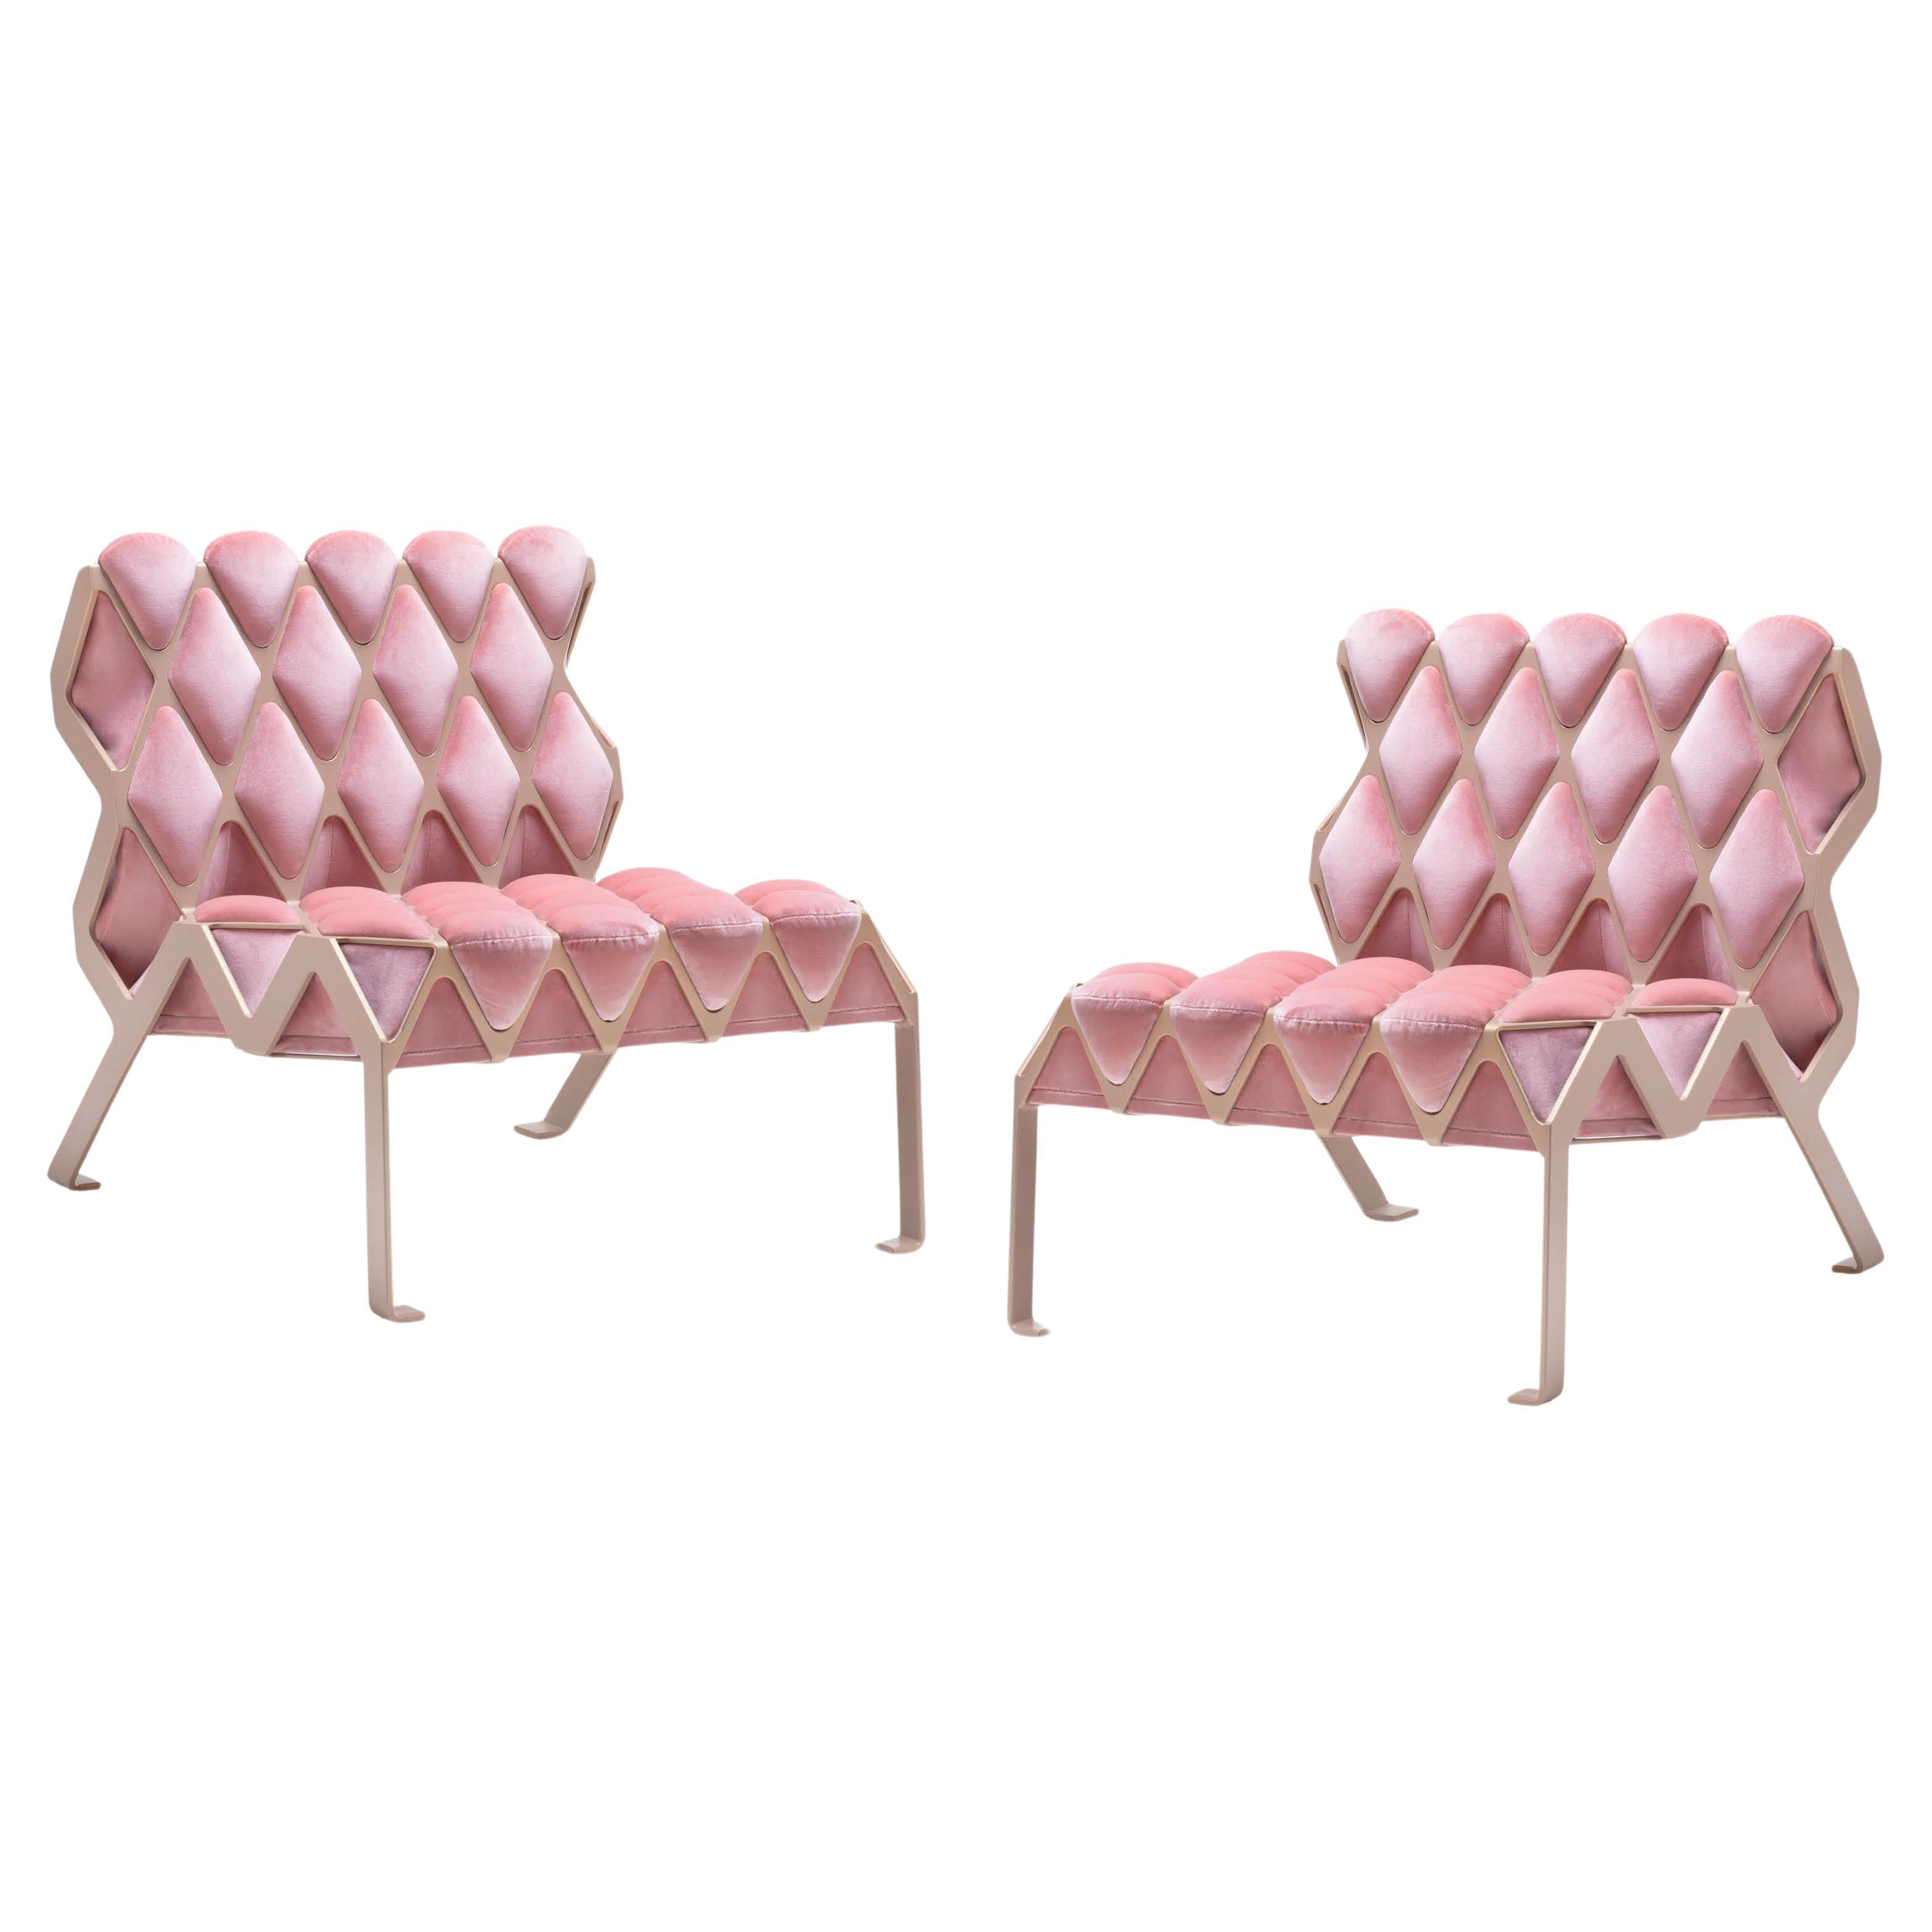 DUO Handcrafted Matrice Chair in Steel and Parma Velvet by Tawla